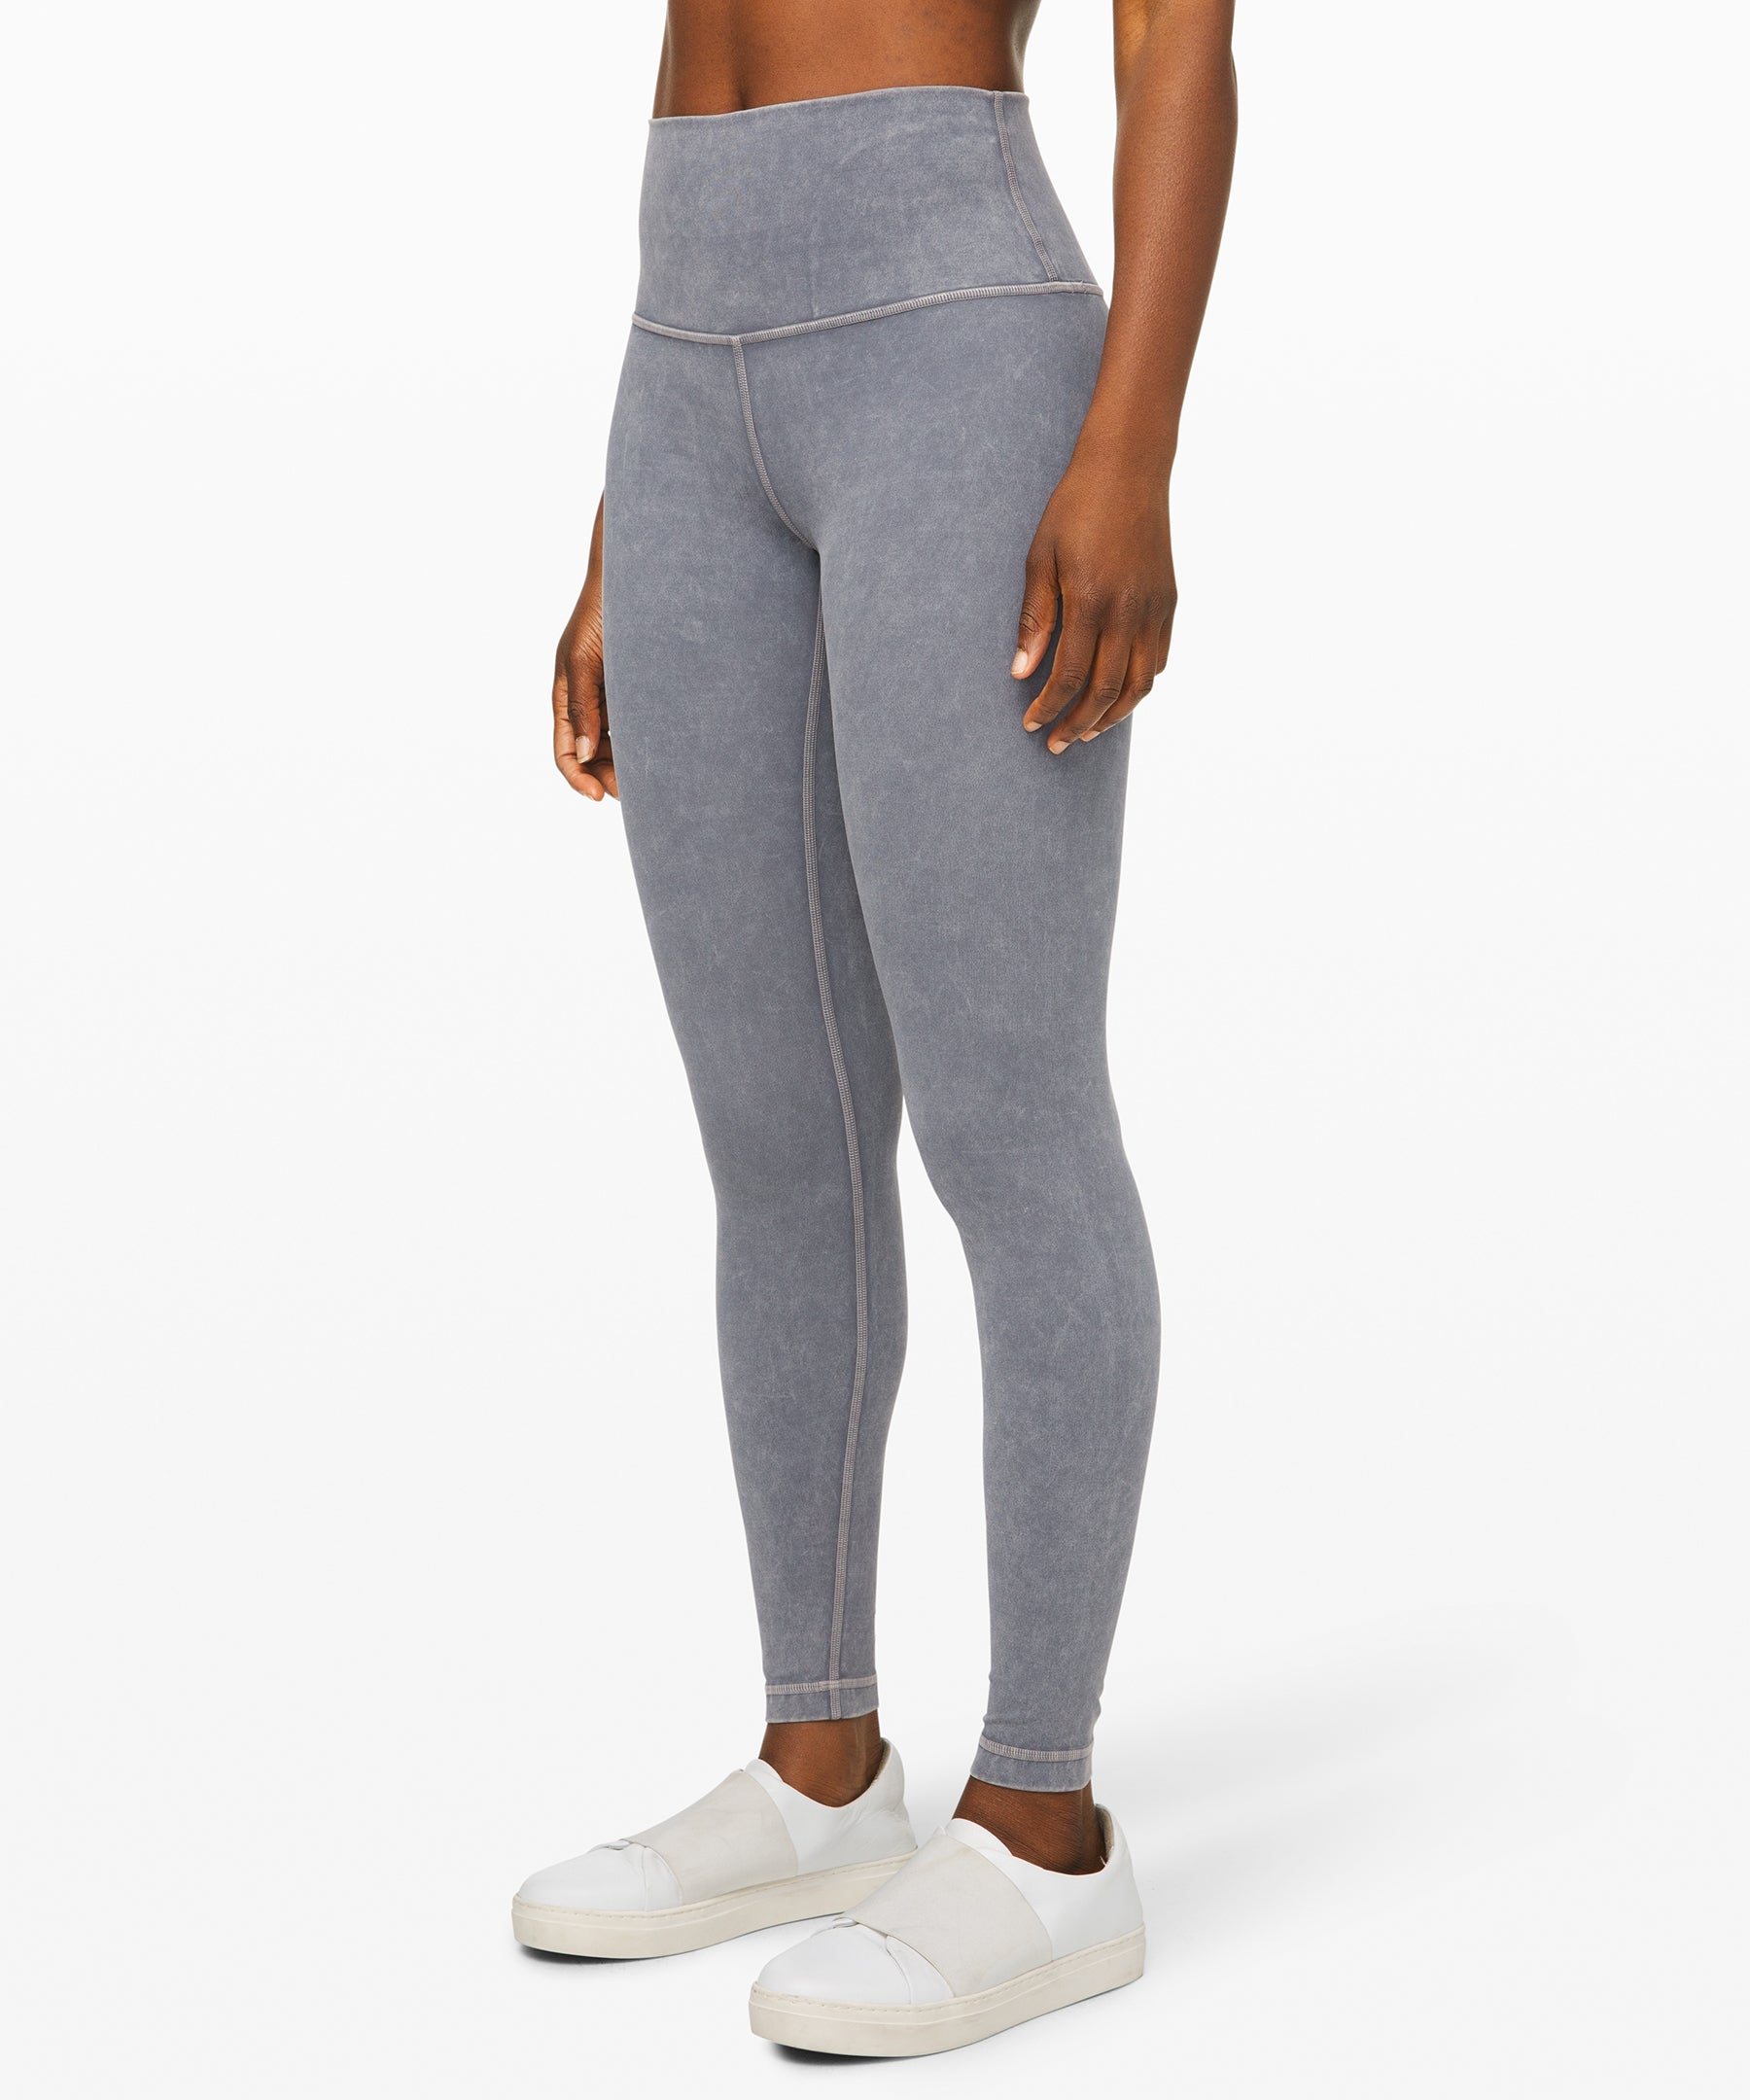 Lululemon Wunder Under High Rise Tight 25 7/8 Yoga Pants, Black Luxtreme, 4  : Amazon.in: Clothing & Accessories